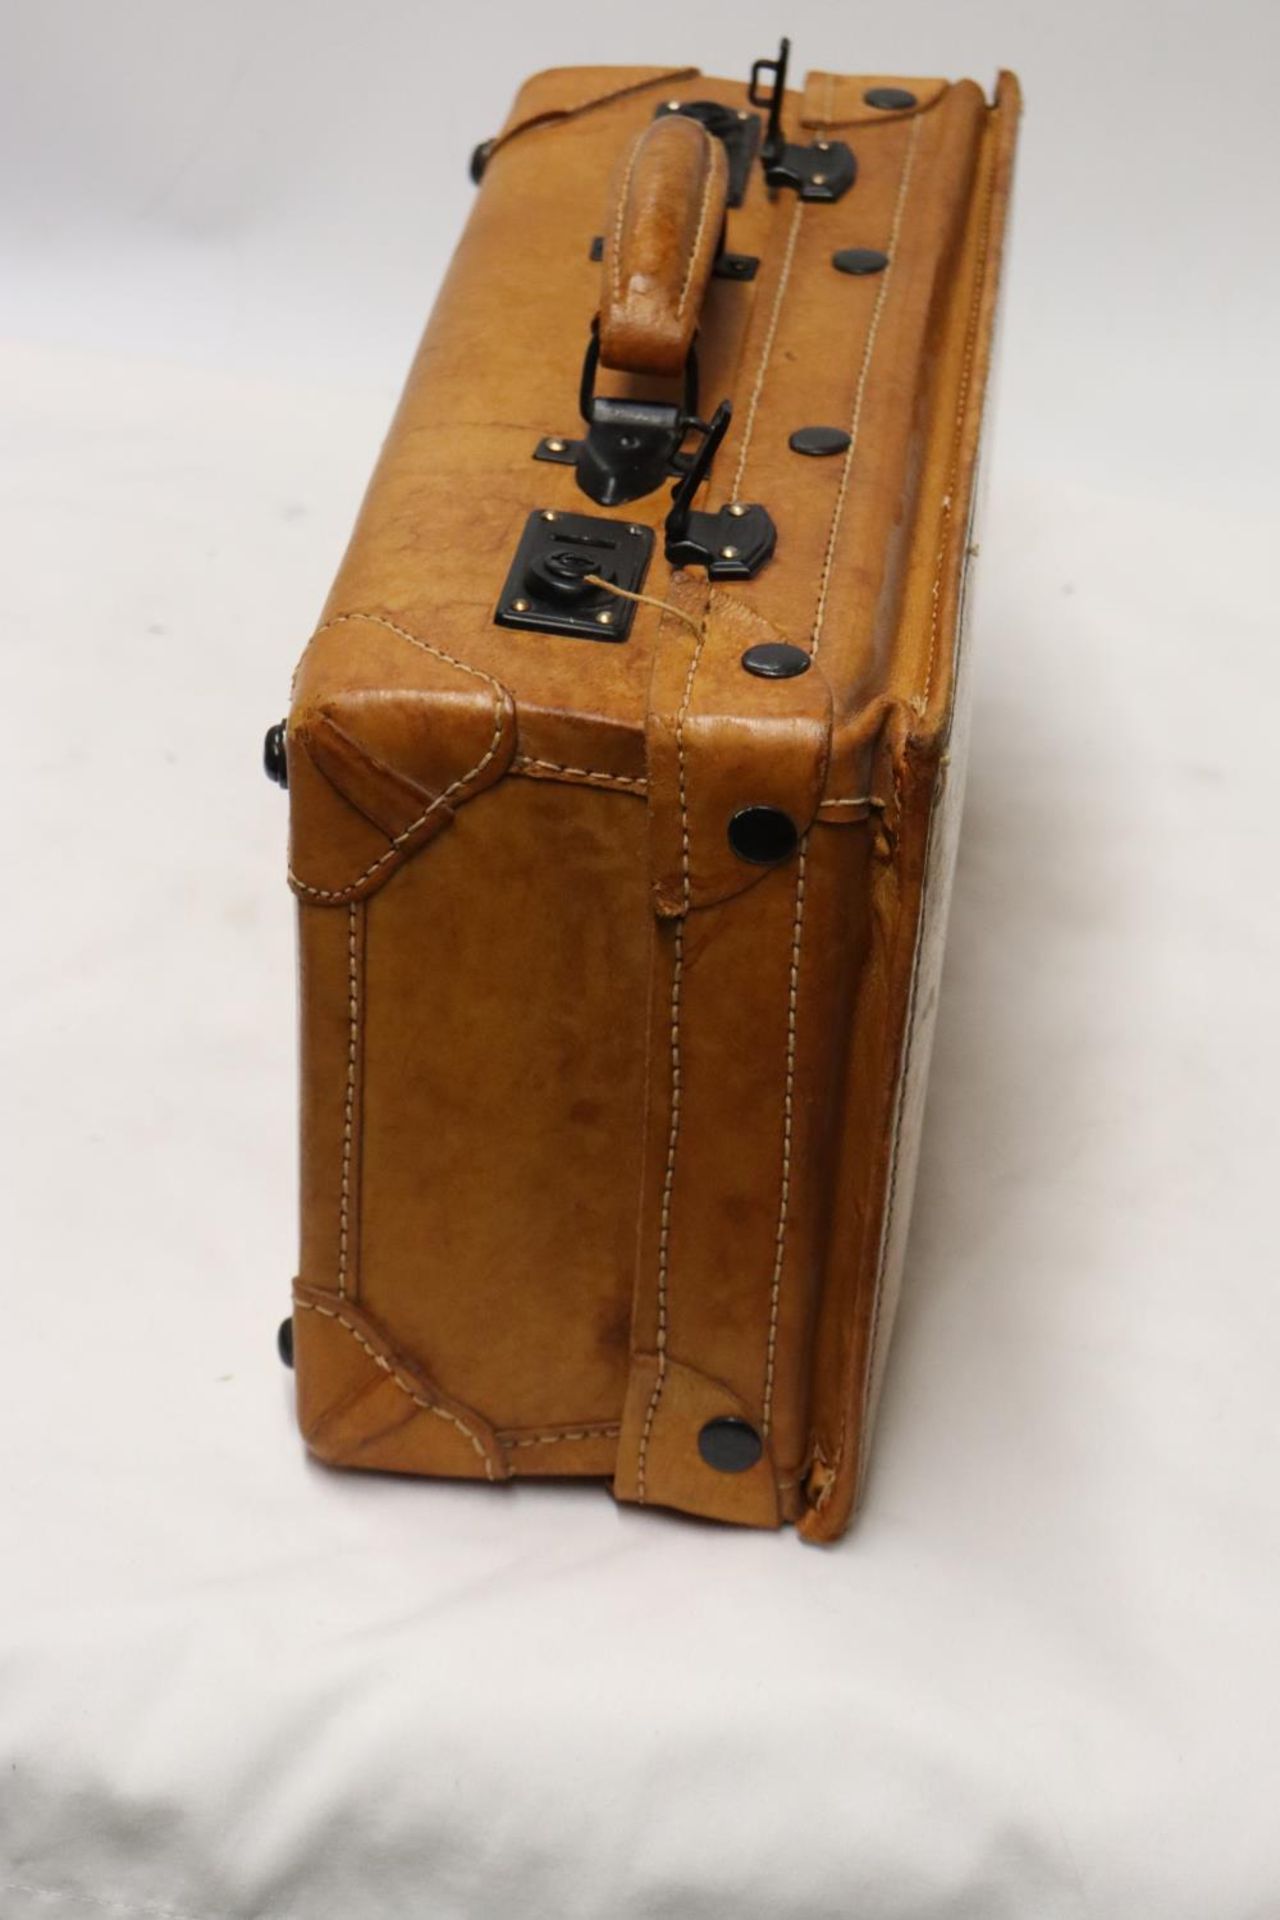 THREE VINTAGE STYLE LEATHER SUITCASES - Image 3 of 4